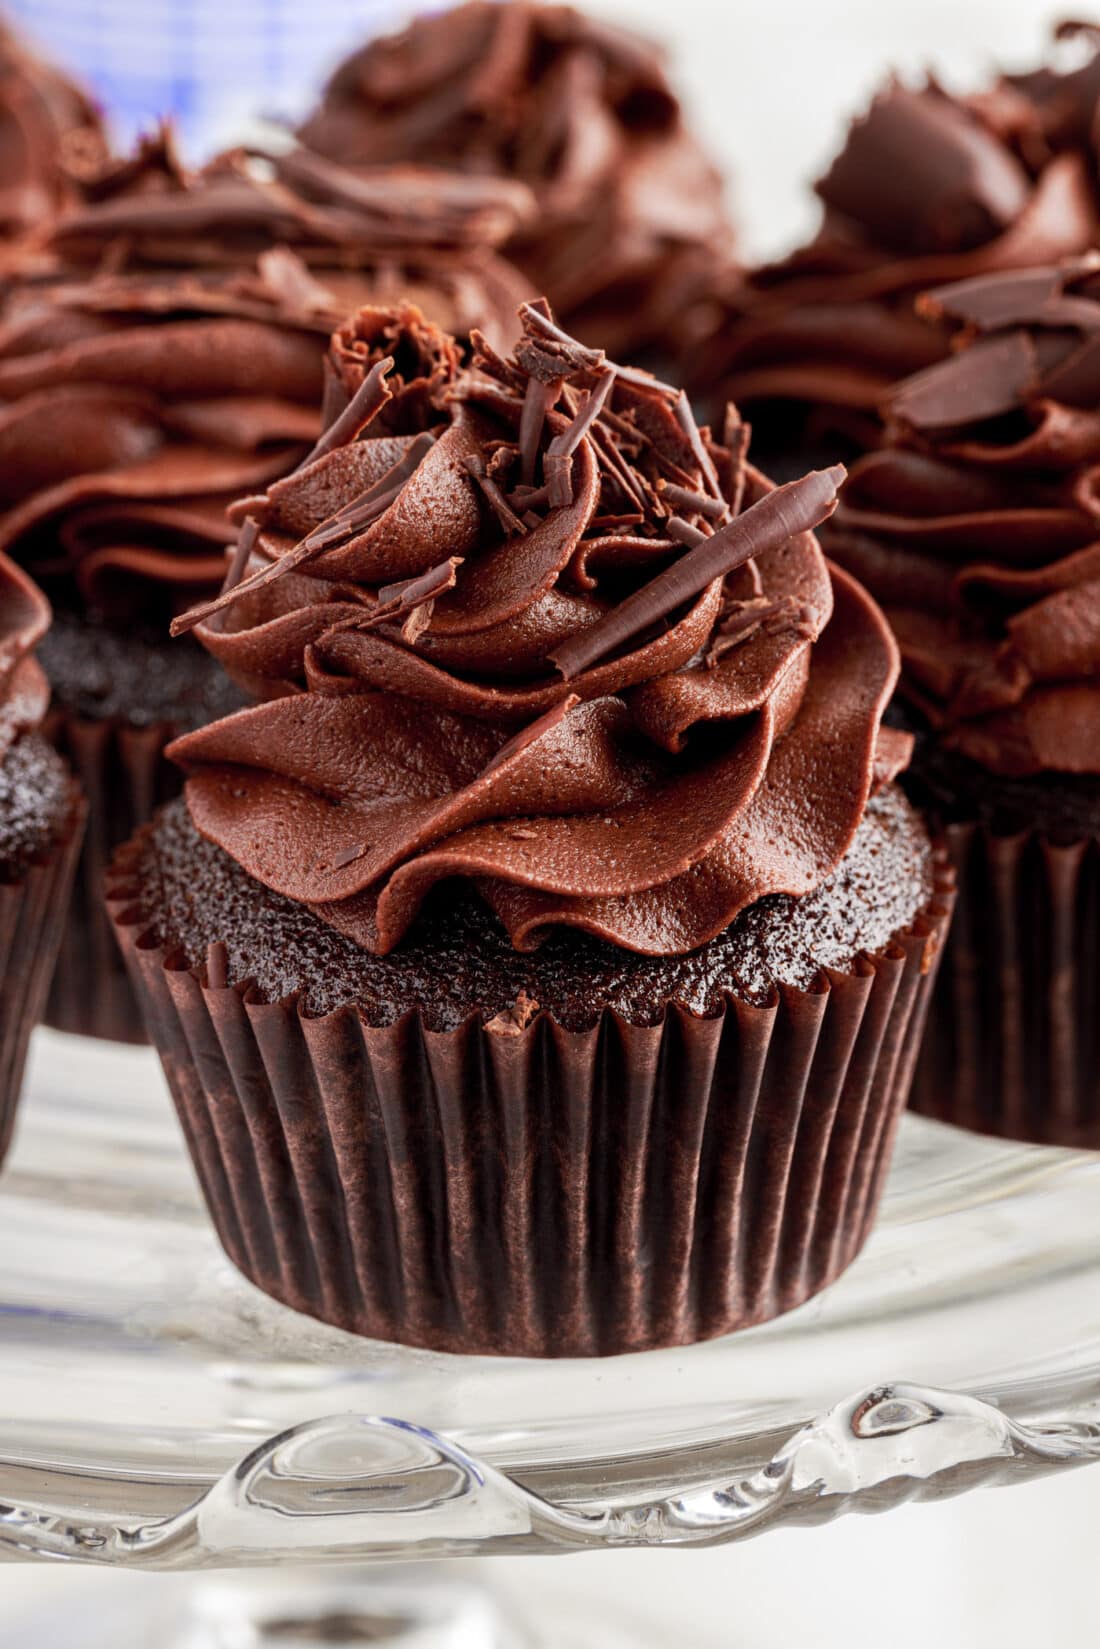 A close up of a Double Chocolate Cupcake on a cake stand